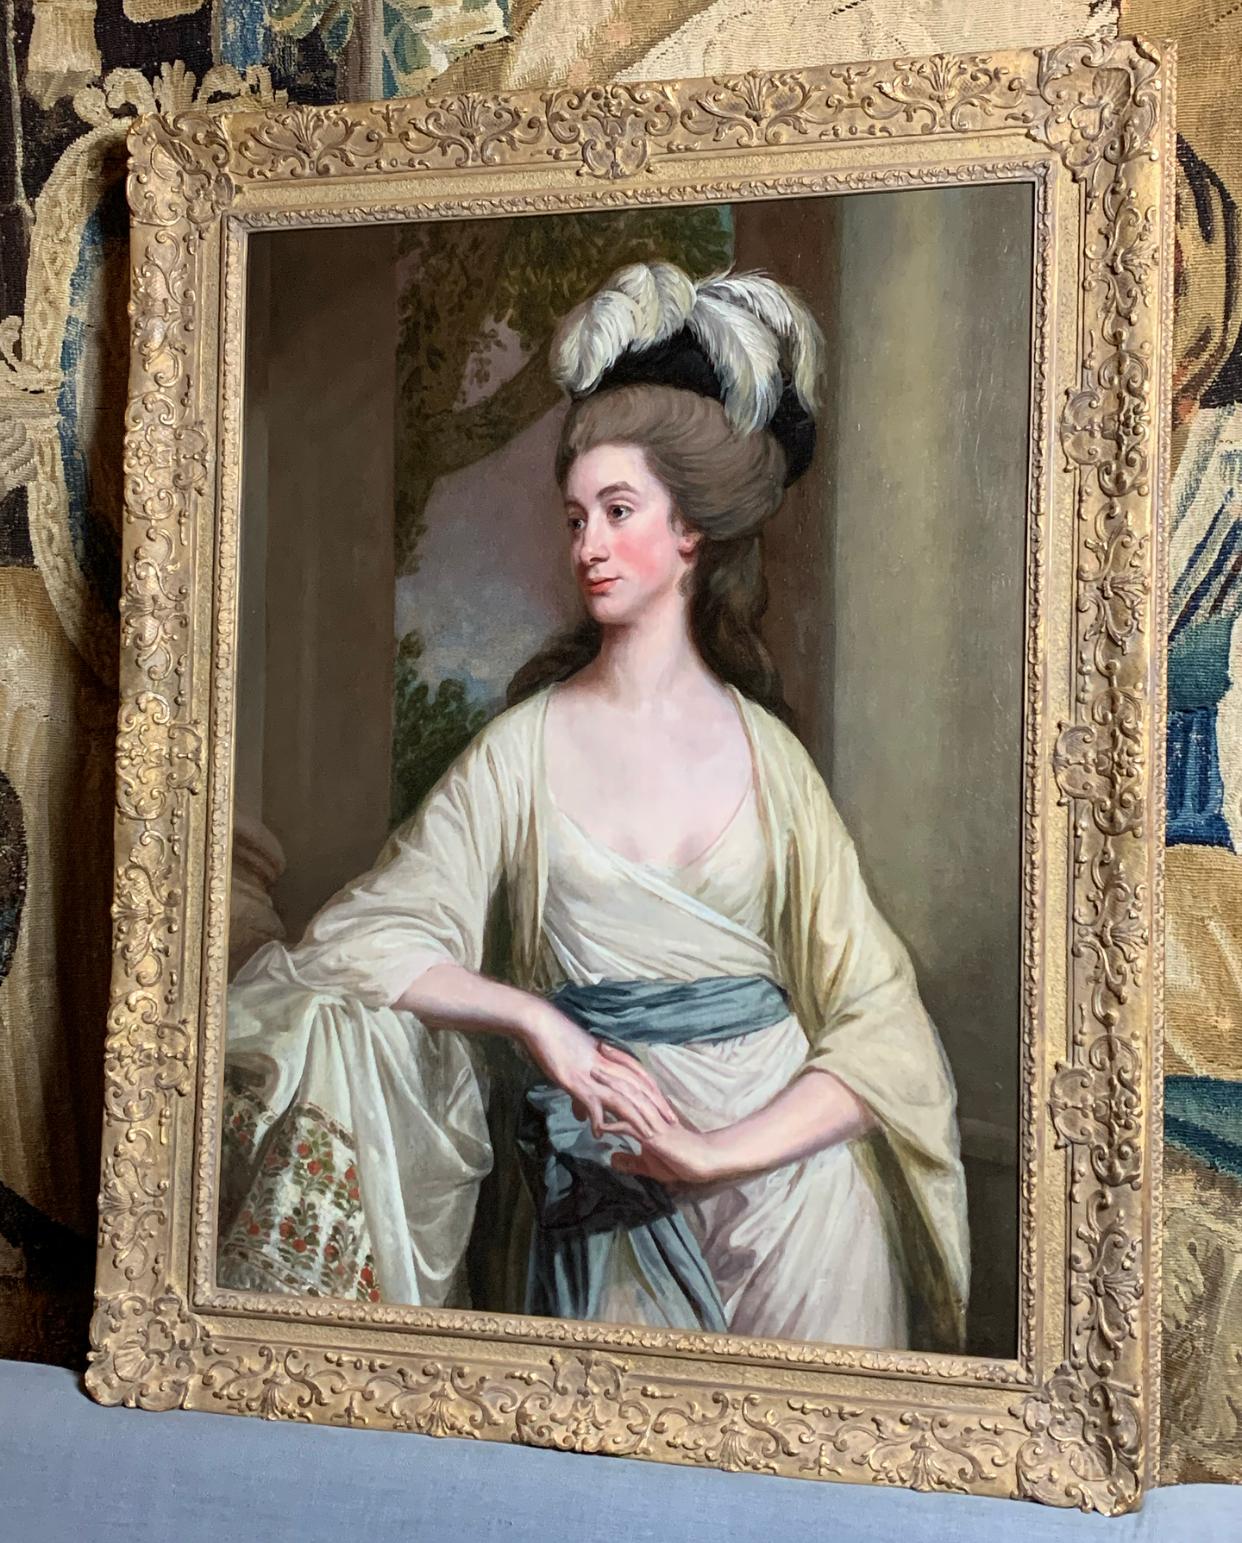 PORTRAIT OF A LADY BY SIR. NATHANIEL DANCE - HOLLAND R.A  (1735-1811) 

A particularly fine quality, 18th century English, the portrait of a beauty (traditionally identified as Eliza Fitzgerald) by the acclaimed artist Sir Nathaniel Dance- Holland